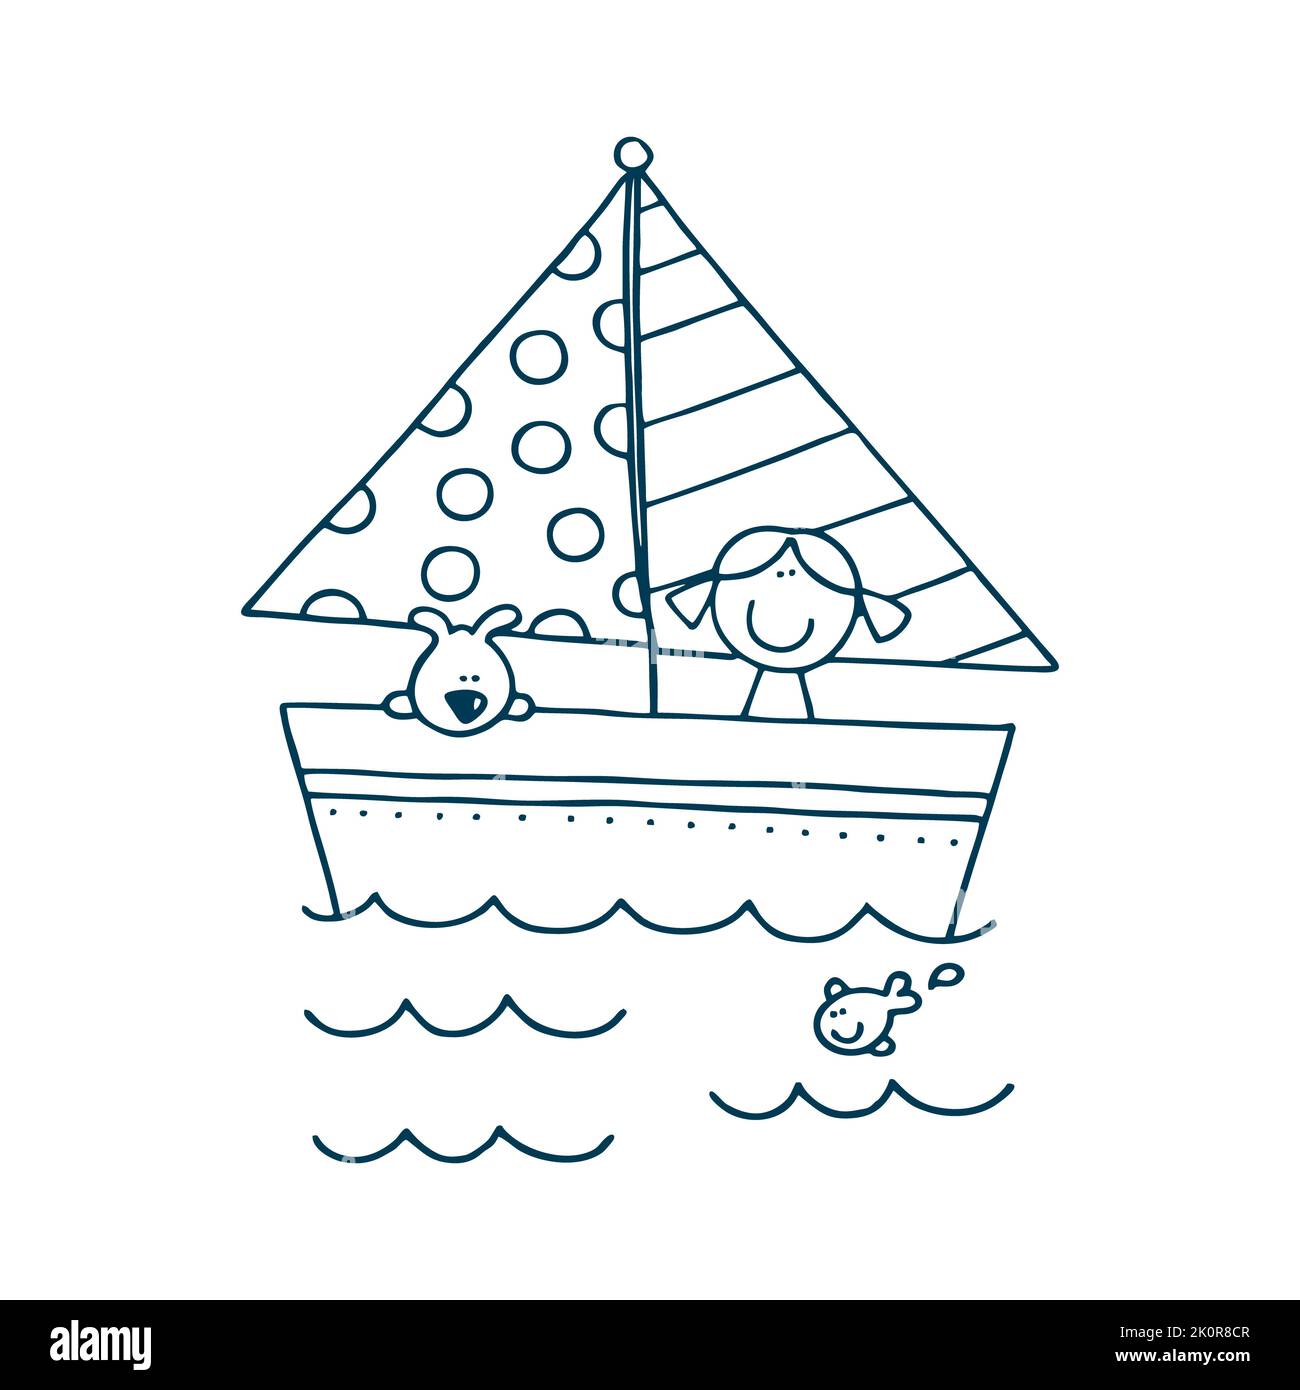 Funny ship floating in water and other baby toys on sand of a sea beach on a sunny summer day, black and white vector illustration in a cartoon style Stock Photo